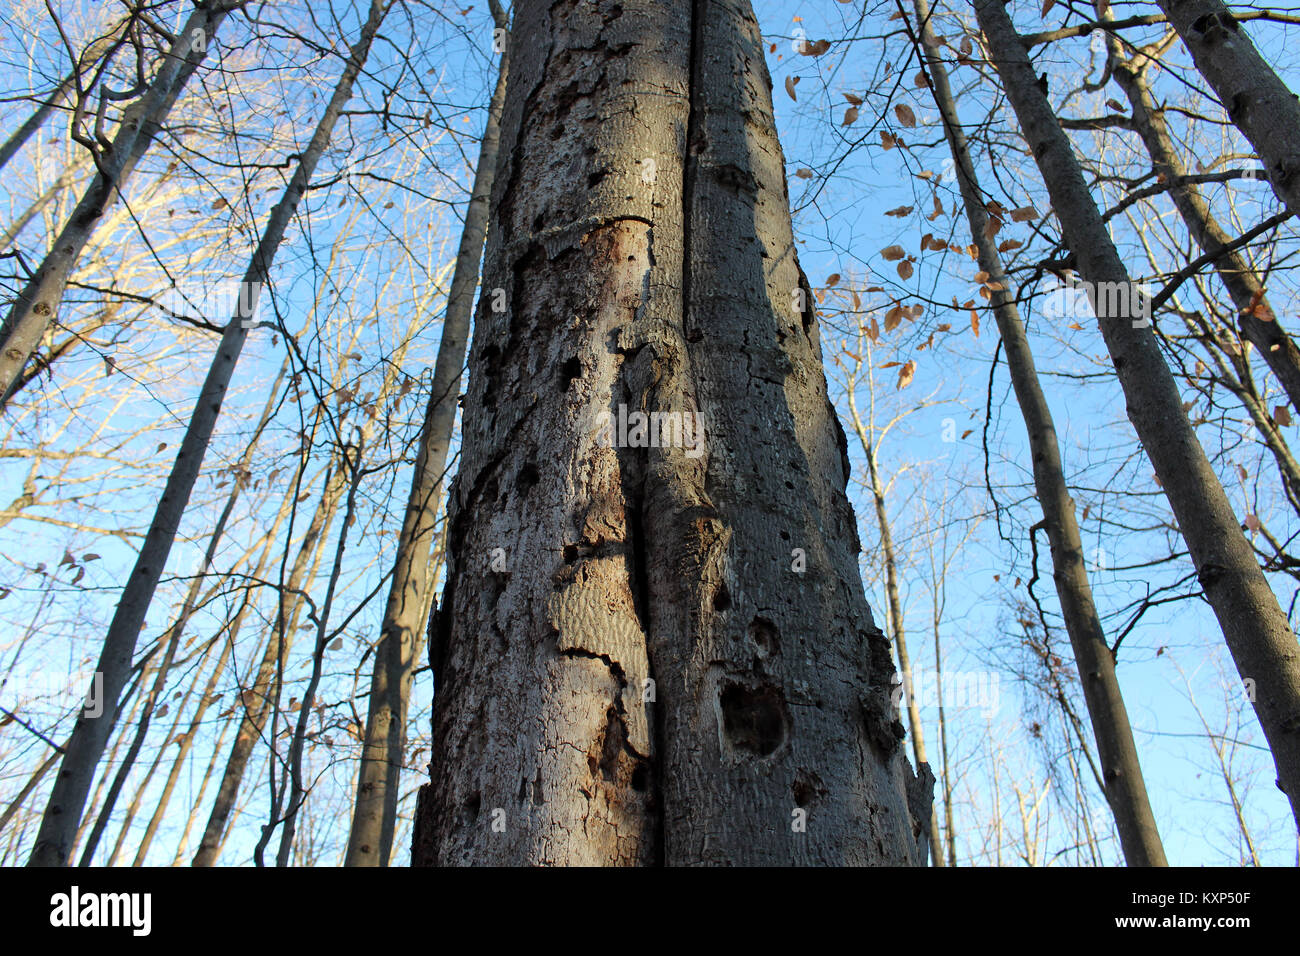 looking up at trees and a blue sky in a forest, Peterborough, Ontario, Canada. Stock Photo